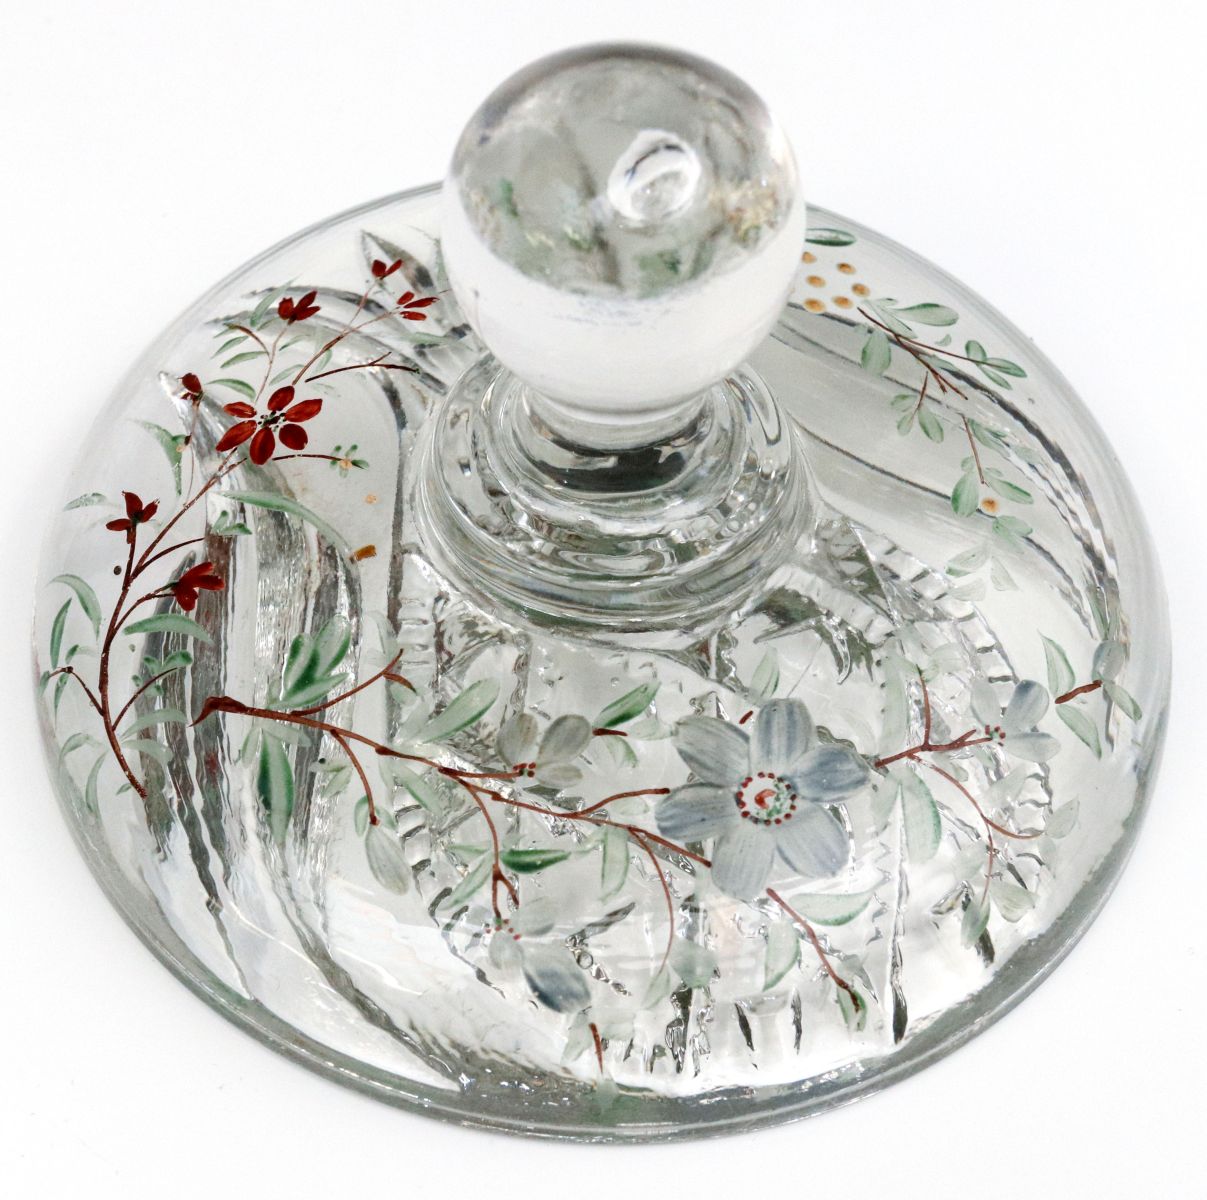 A RARE GLASS BUTTER STAMP WITH PAINTED FLOWERS C. 1880